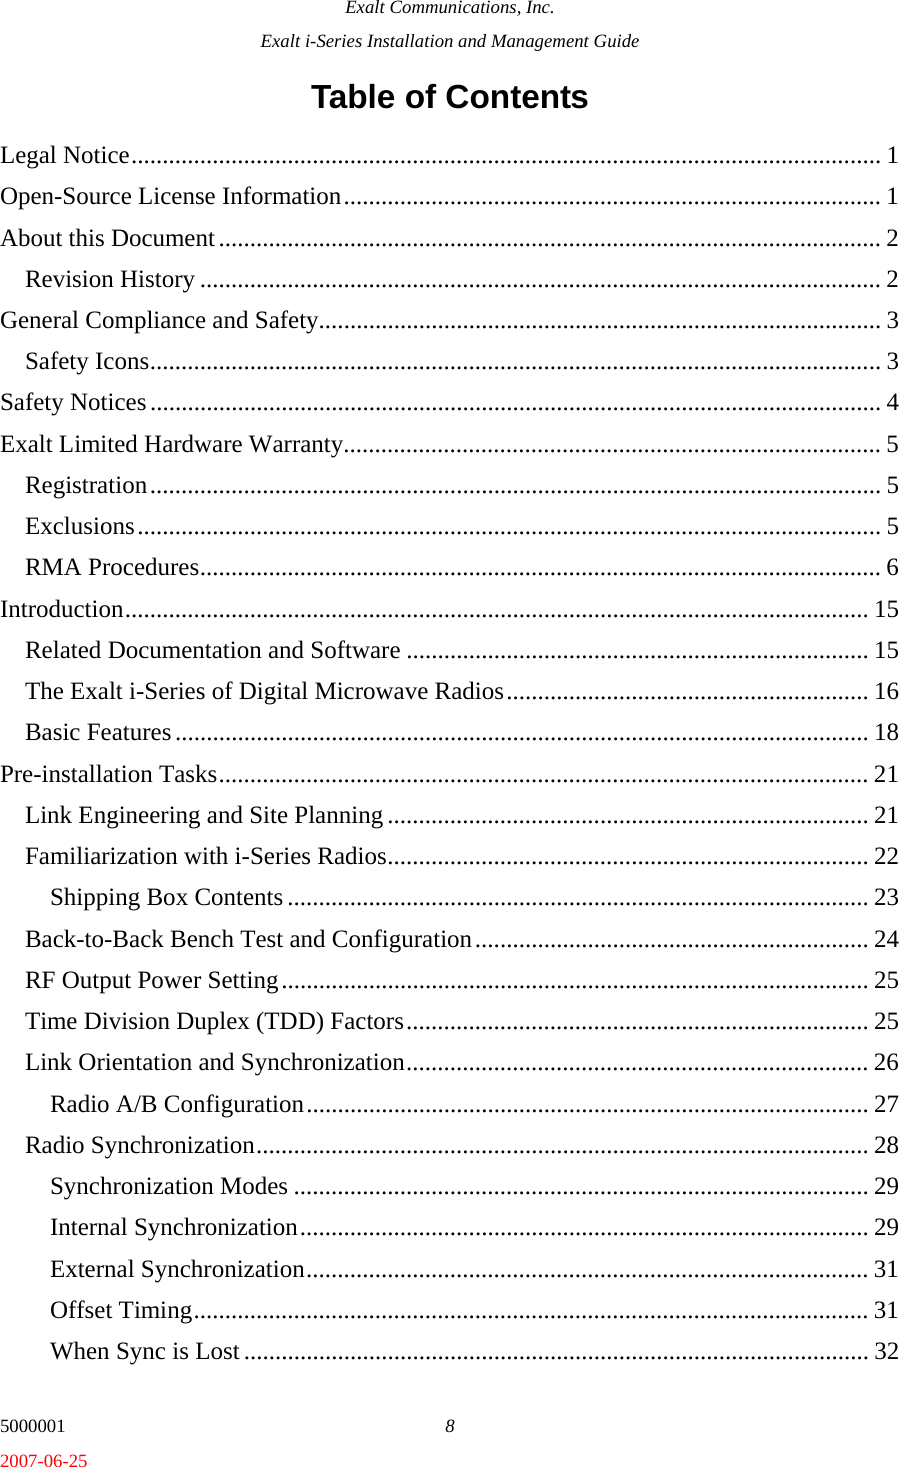 Exalt Communications, Inc. Exalt i-Series Installation and Management Guide 5000001  8 2007-06-25 Table of Contents Legal Notice........................................................................................................................ 1 Open-Source License Information...................................................................................... 1 About this Document.......................................................................................................... 2 Revision History ............................................................................................................. 2 General Compliance and Safety.......................................................................................... 3 Safety Icons..................................................................................................................... 3 Safety Notices..................................................................................................................... 4 Exalt Limited Hardware Warranty...................................................................................... 5 Registration..................................................................................................................... 5 Exclusions....................................................................................................................... 5 RMA Procedures............................................................................................................. 6 Introduction....................................................................................................................... 15 Related Documentation and Software .......................................................................... 15 The Exalt i-Series of Digital Microwave Radios.......................................................... 16 Basic Features............................................................................................................... 18 Pre-installation Tasks........................................................................................................ 21 Link Engineering and Site Planning ............................................................................. 21 Familiarization with i-Series Radios............................................................................. 22 Shipping Box Contents ............................................................................................. 23 Back-to-Back Bench Test and Configuration............................................................... 24 RF Output Power Setting.............................................................................................. 25 Time Division Duplex (TDD) Factors.......................................................................... 25 Link Orientation and Synchronization.......................................................................... 26 Radio A/B Configuration.......................................................................................... 27 Radio Synchronization.................................................................................................. 28 Synchronization Modes ............................................................................................ 29 Internal Synchronization........................................................................................... 29 External Synchronization.......................................................................................... 31 Offset Timing............................................................................................................ 31 When Sync is Lost .................................................................................................... 32 